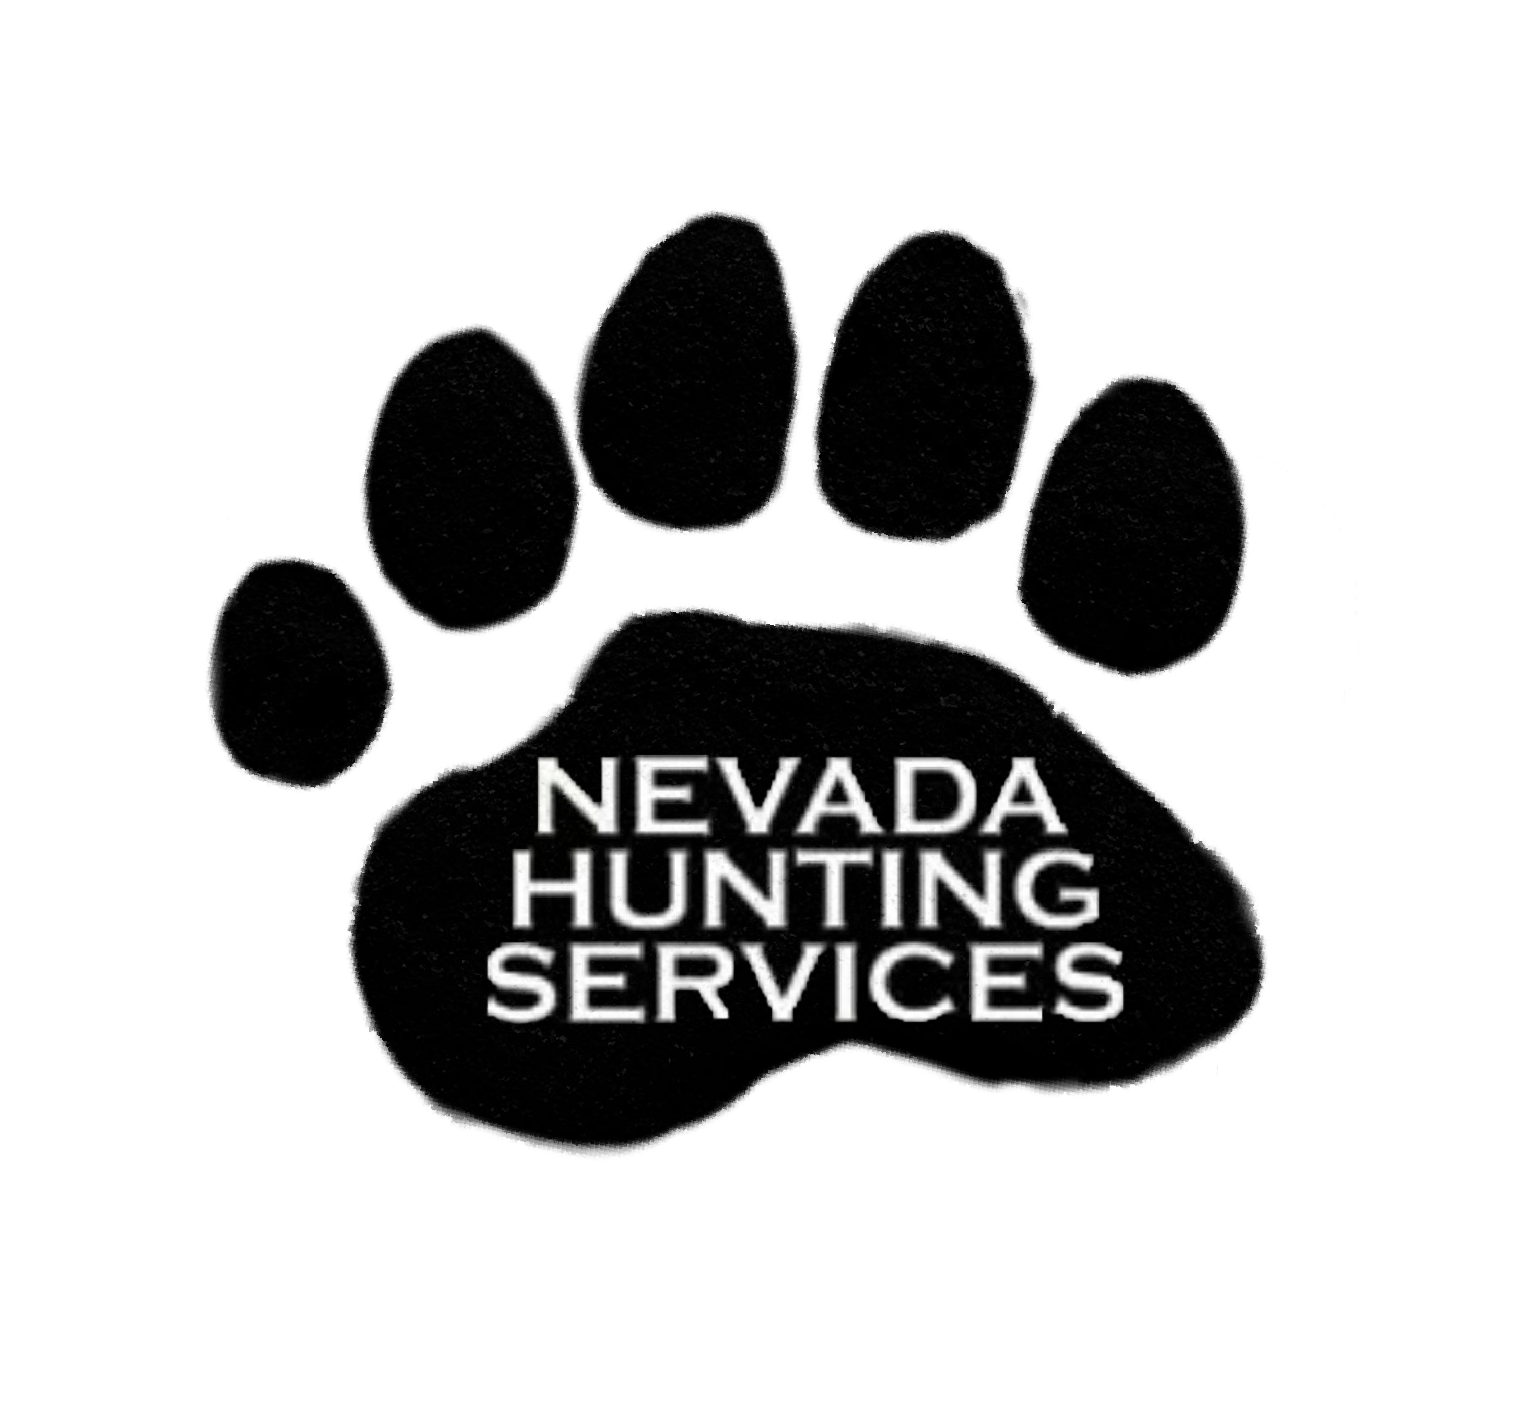 NEVADA HUNTING SERVICES